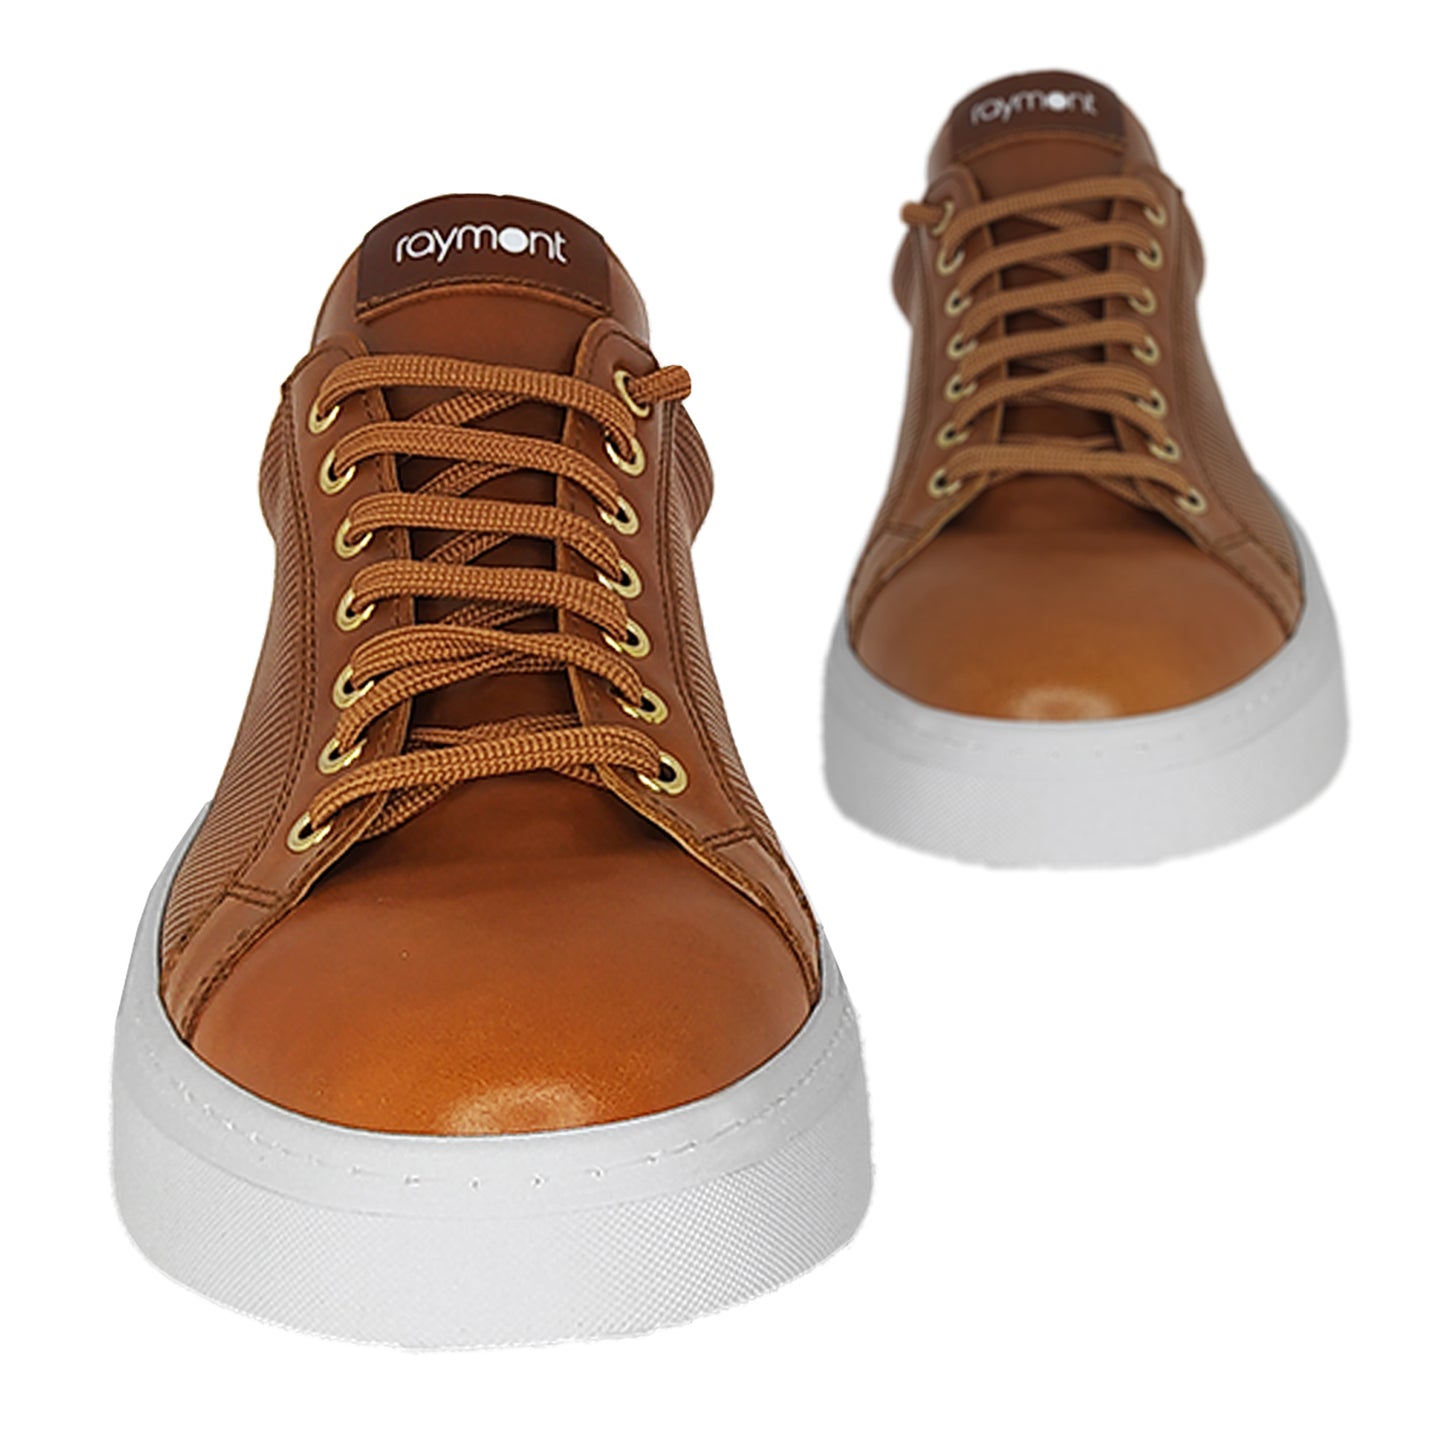 Handmade Leather Sneakers Shoes TABAC 784 TABAC